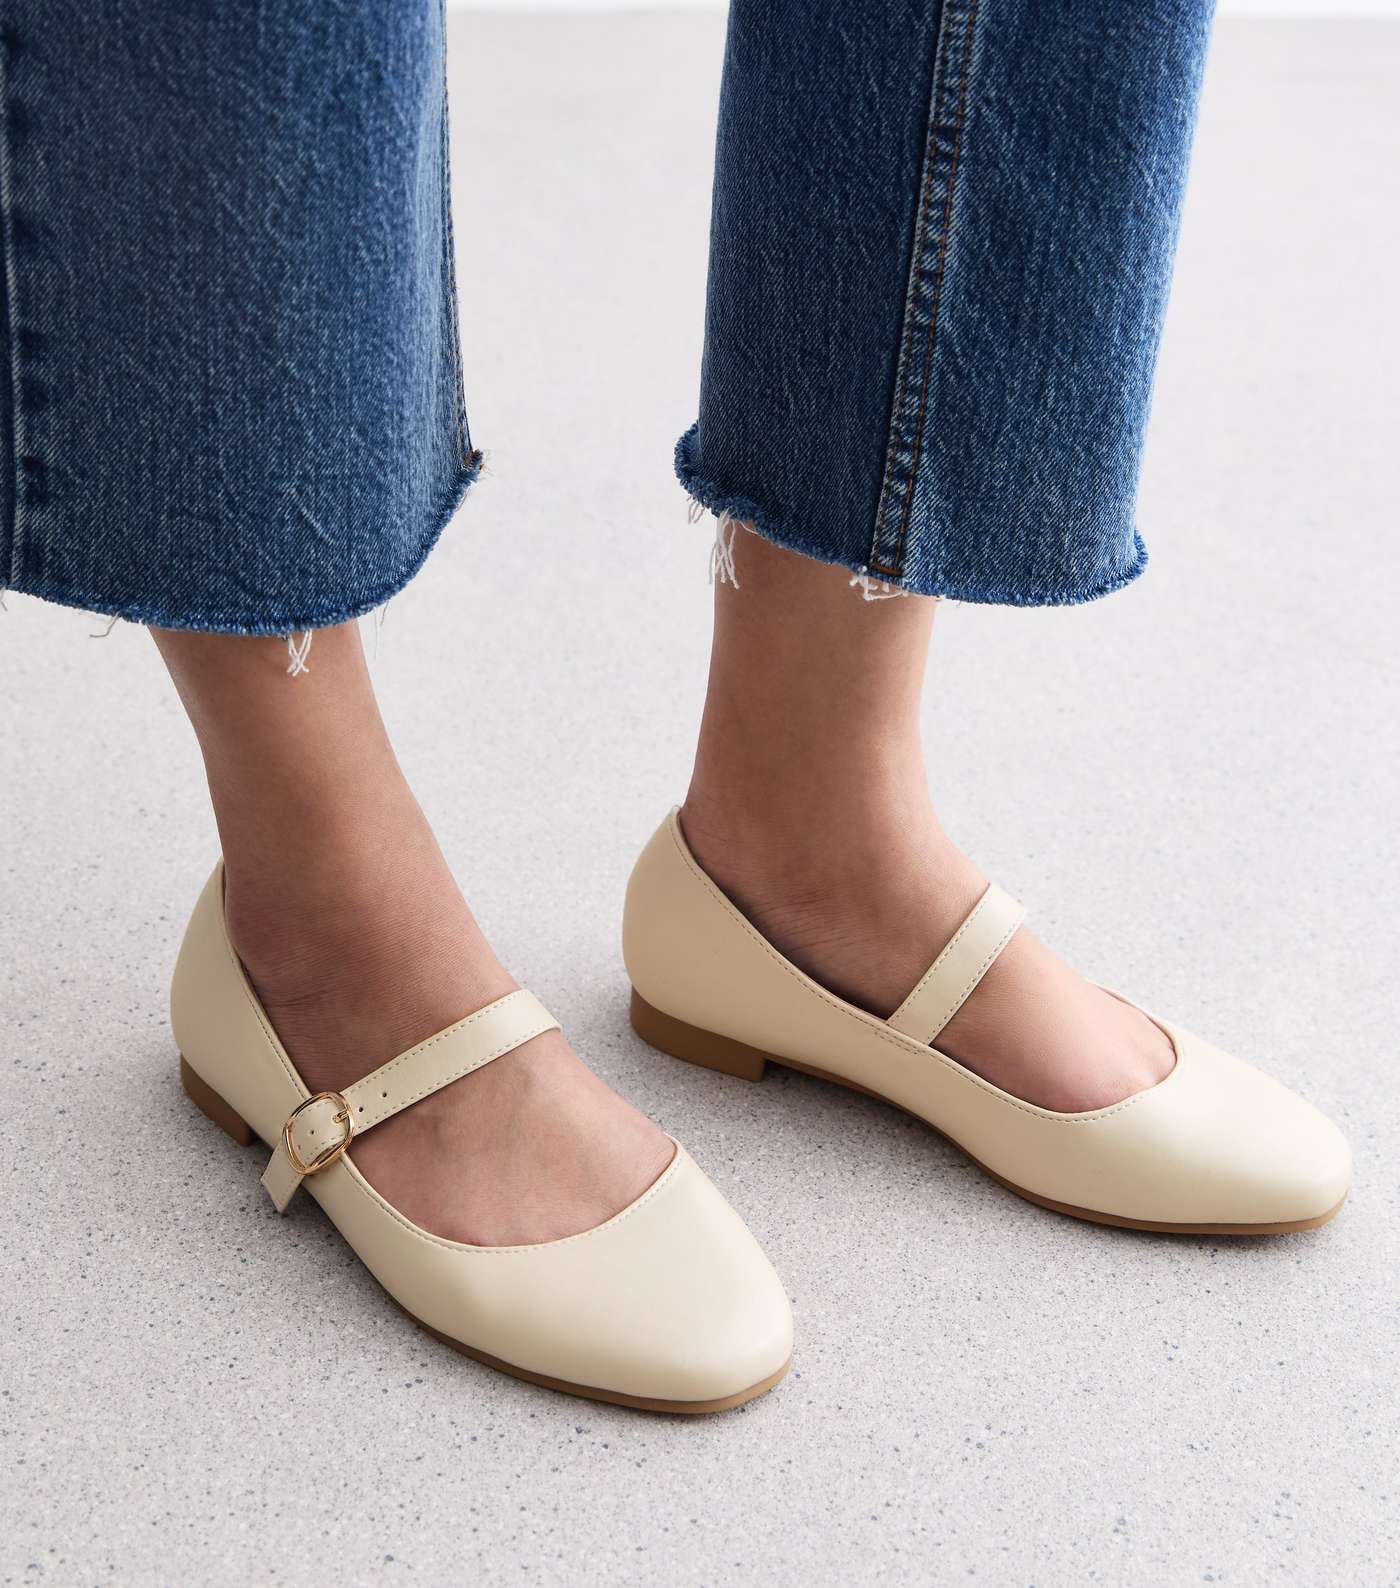 Wide Fit Off White Leather-Look Strappy Ballerina Pumps Image 2